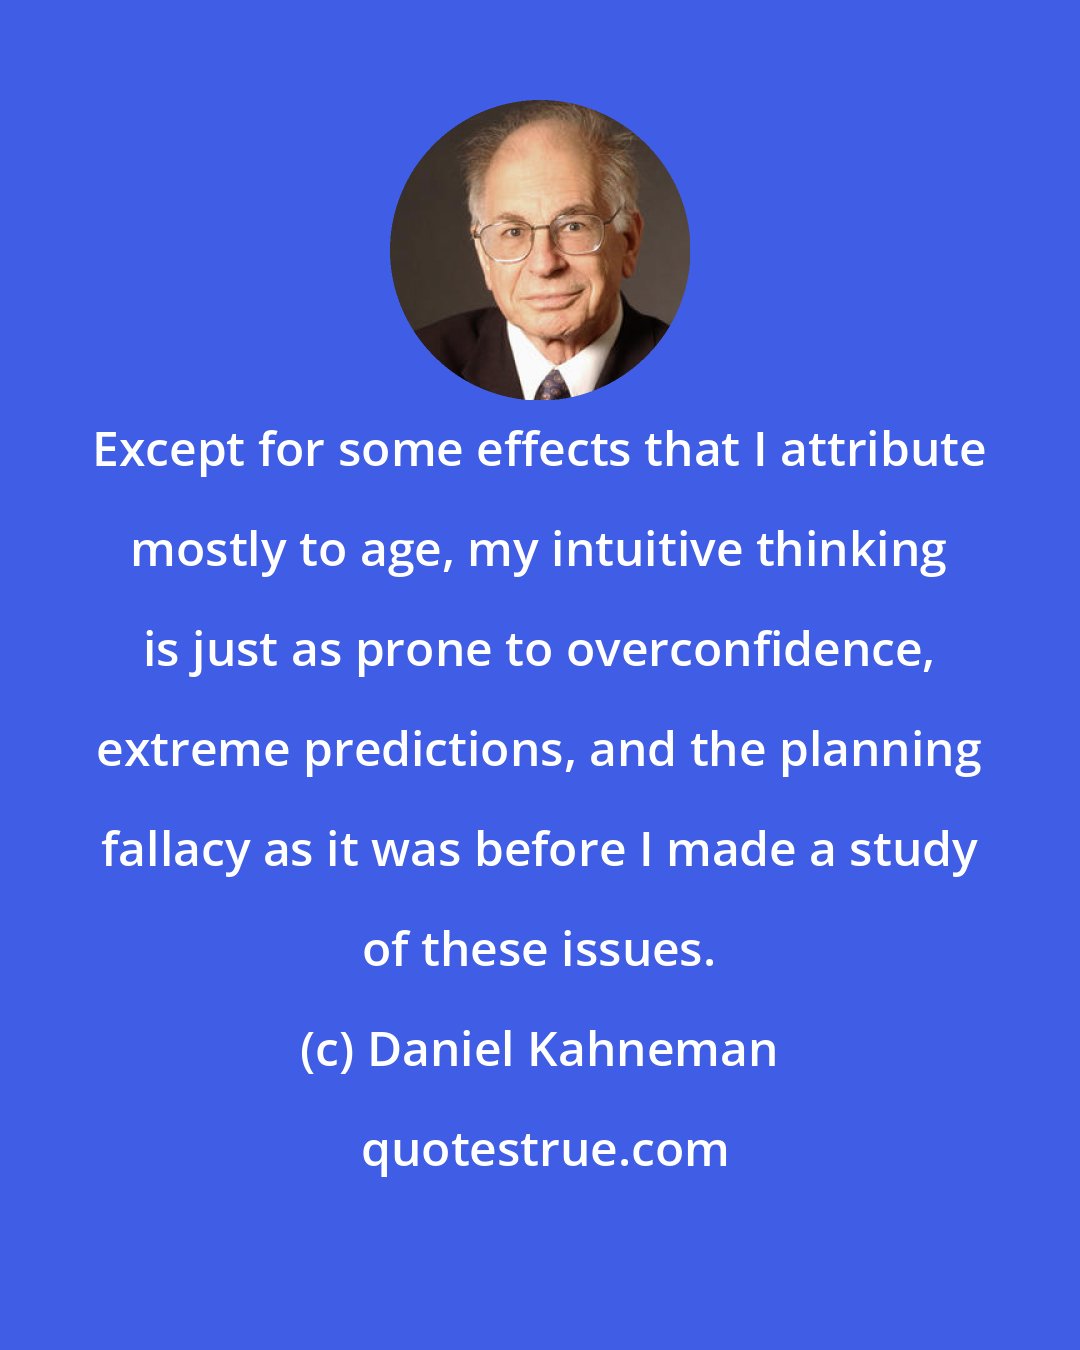 Daniel Kahneman: Except for some effects that I attribute mostly to age, my intuitive thinking is just as prone to overconfidence, extreme predictions, and the planning fallacy as it was before I made a study of these issues.